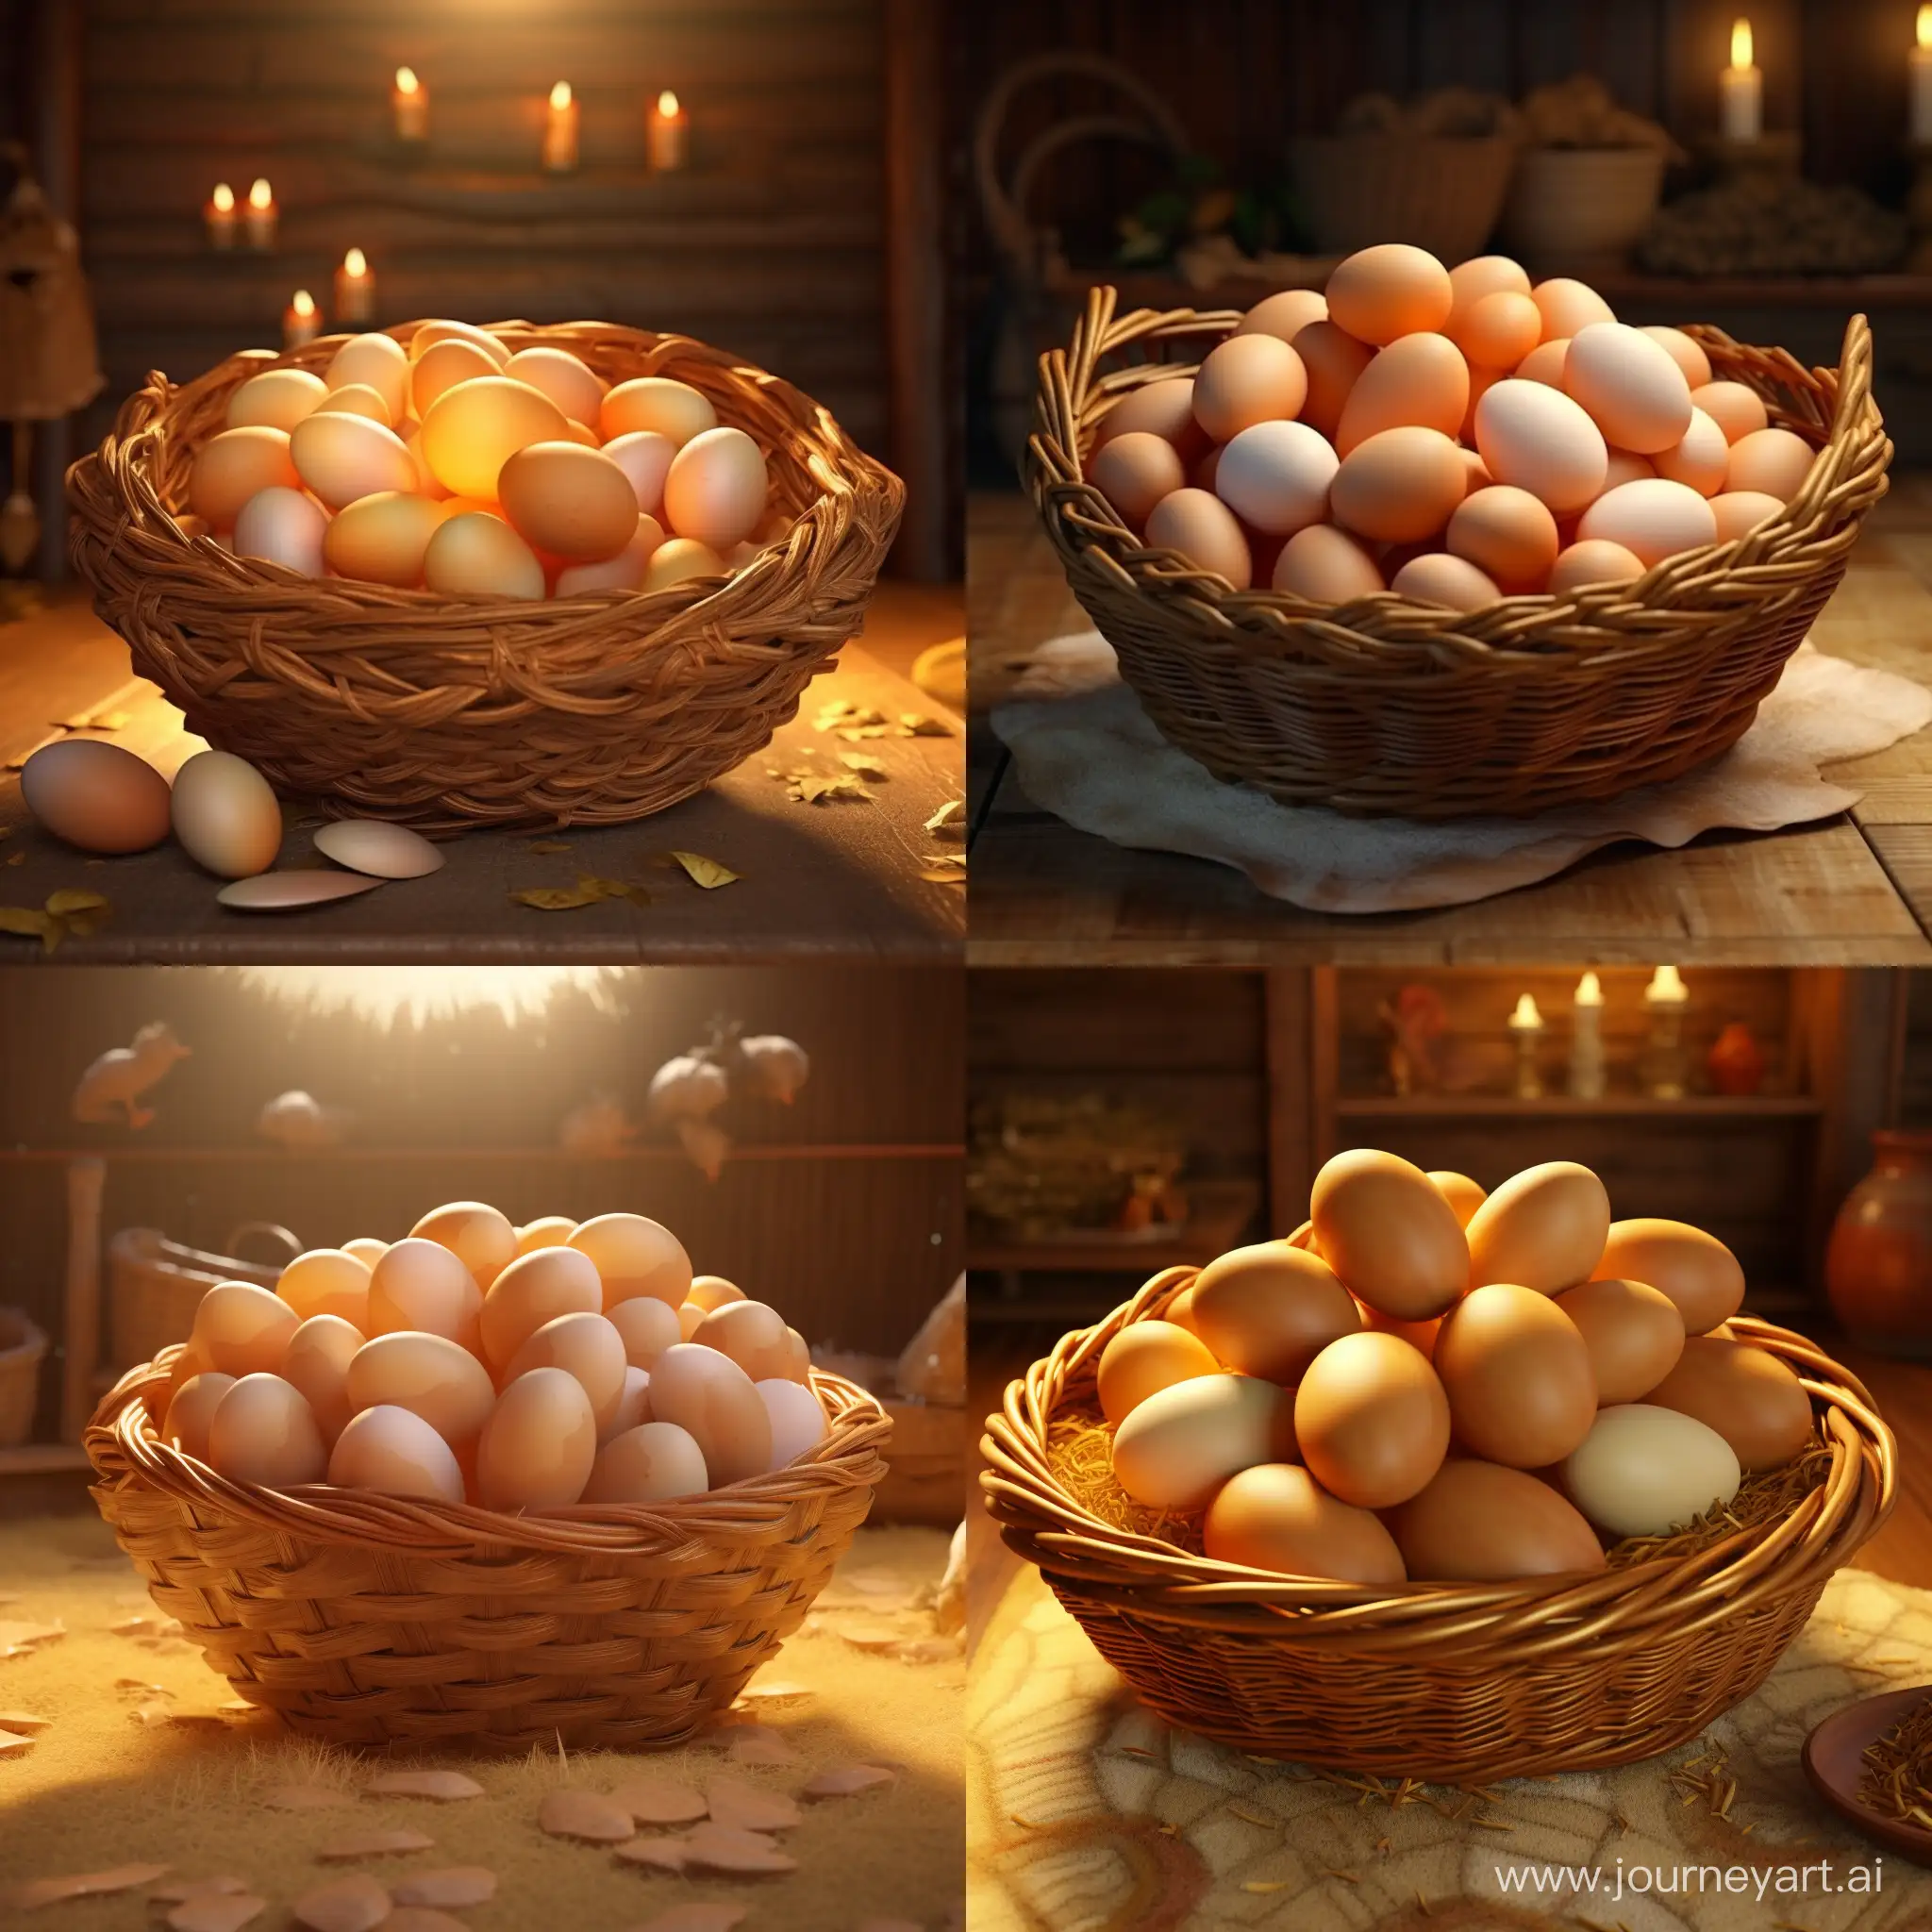 Exquisite-3D-Animation-Artistic-Basket-of-Chicken-Eggs